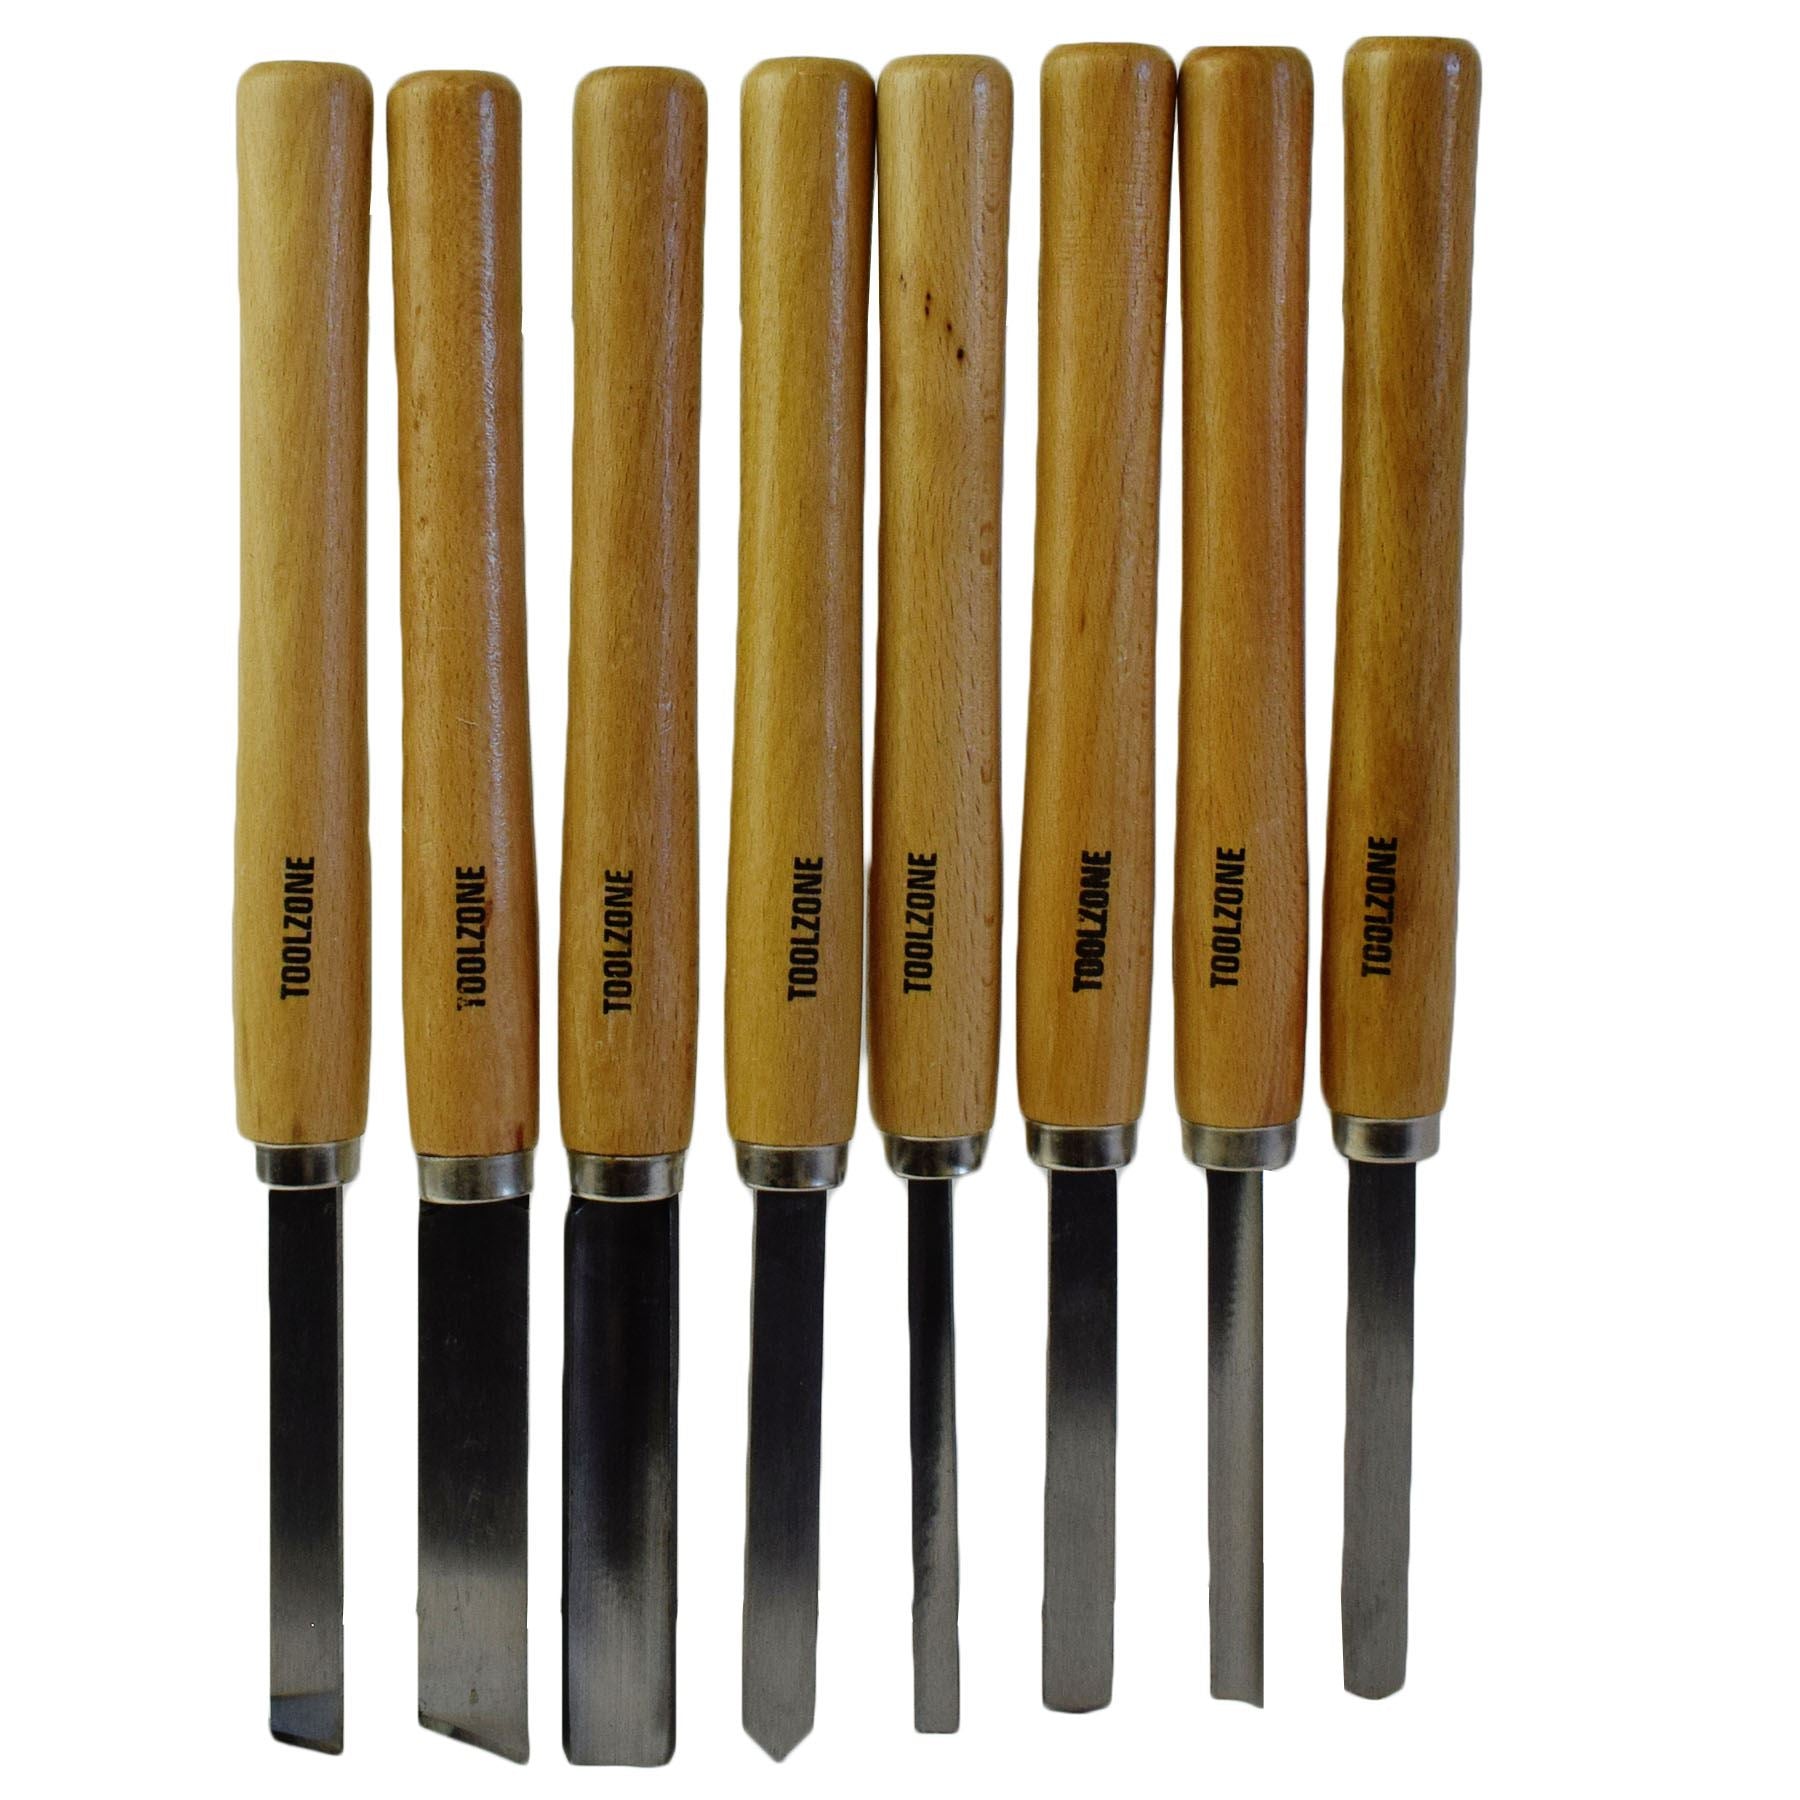 8pc Wood Carving Turning Chisels Woodworking Lathe Carpentry Gouge Skew